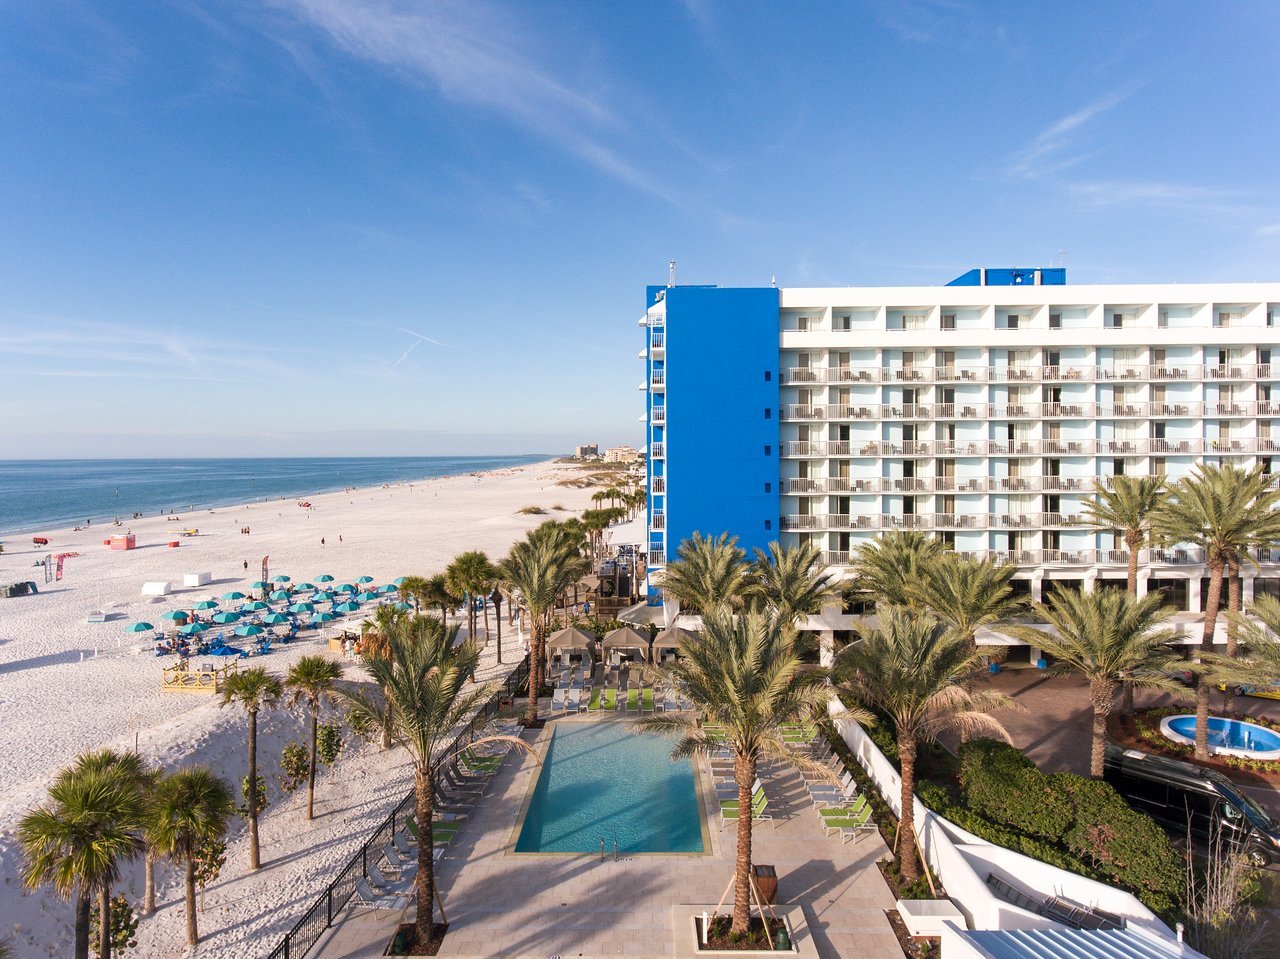 Photo of Hilton Clearwater Beach Resort & Spa, Clearwater, FL